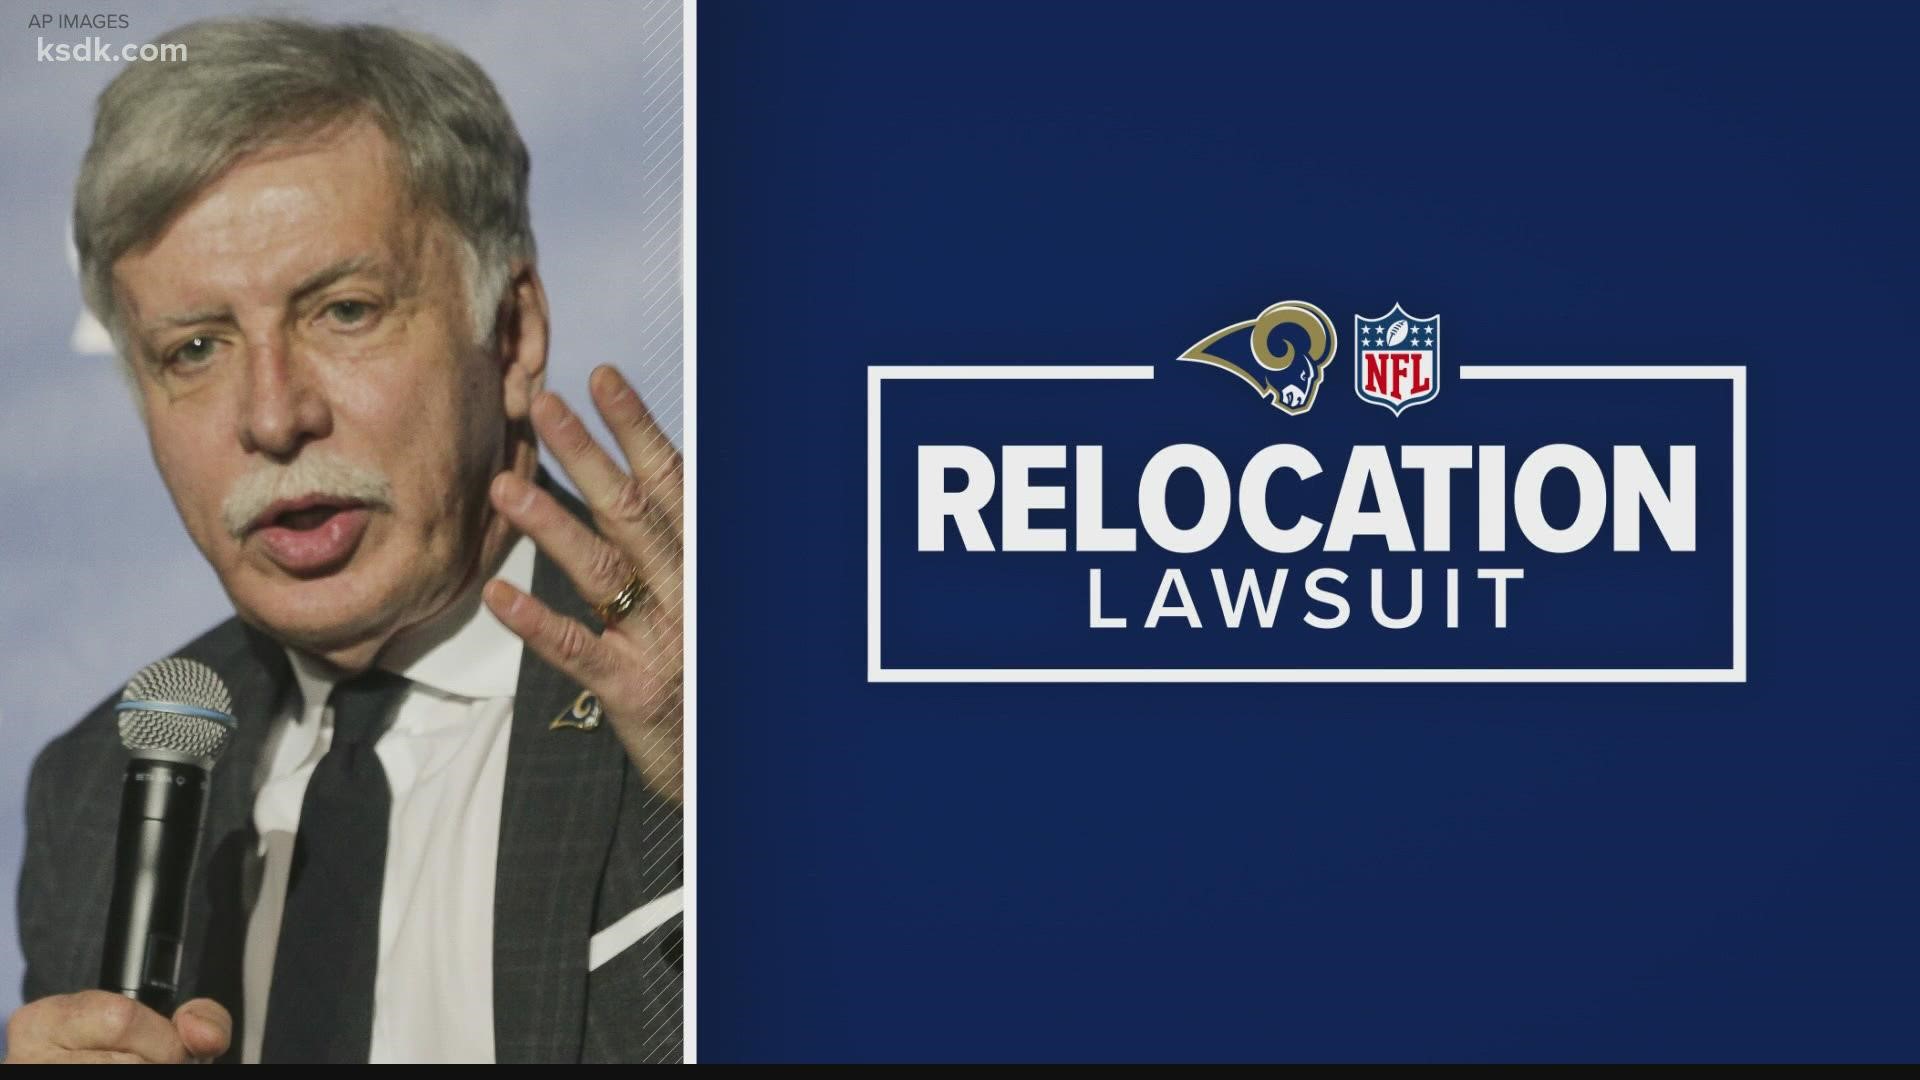 Unless a settlement can be reached, the NFL will be in a trial against St. Louis over the relocation of the Rams. It's slated to start Jan. 10.